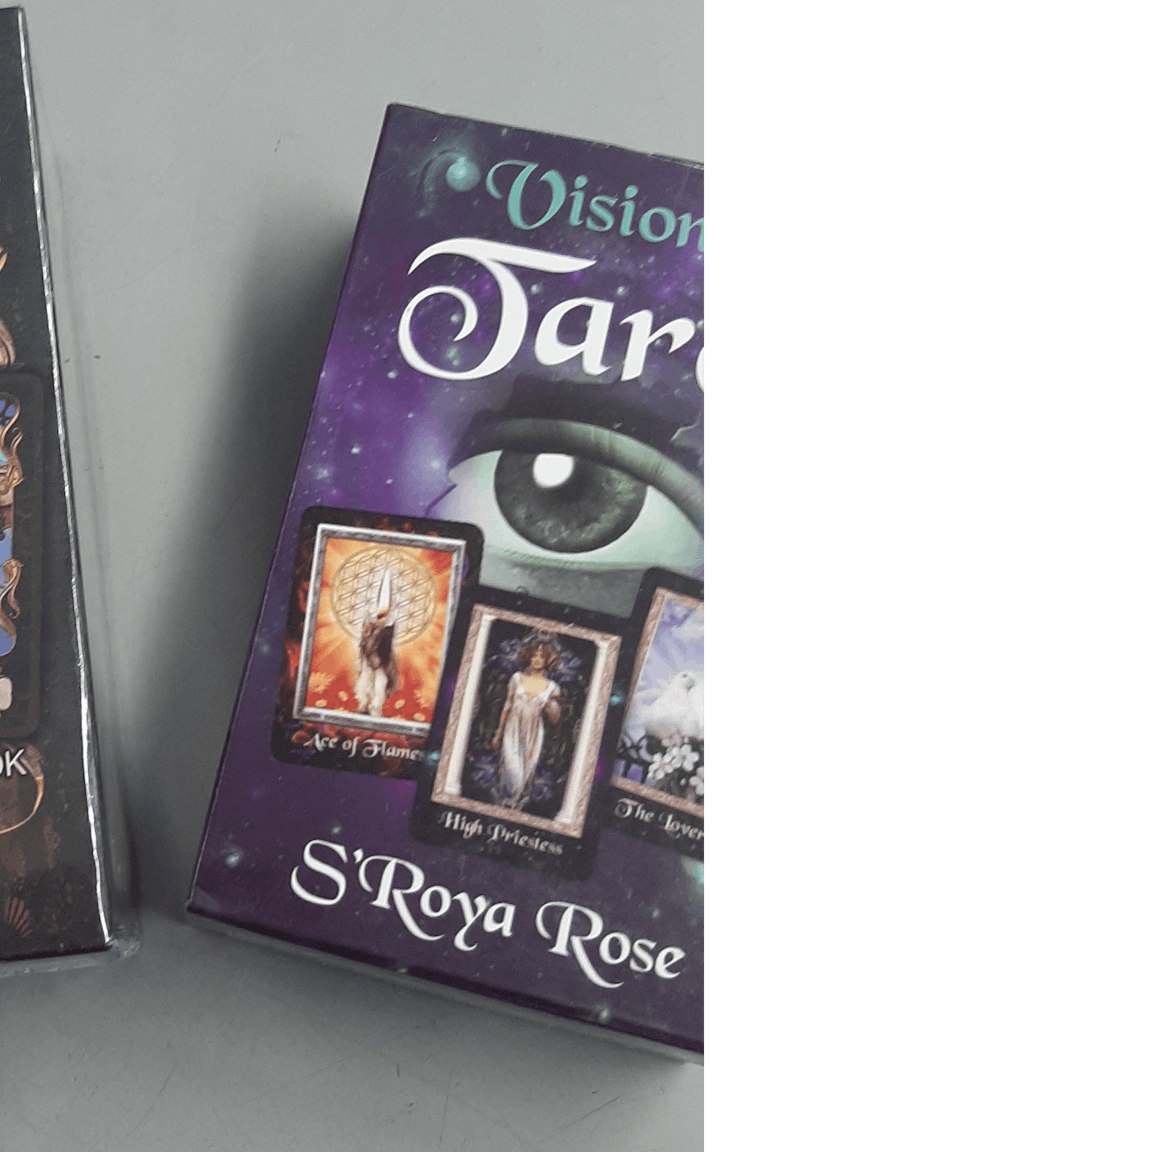 We have a large range of tarot and oracle decks to choose from.